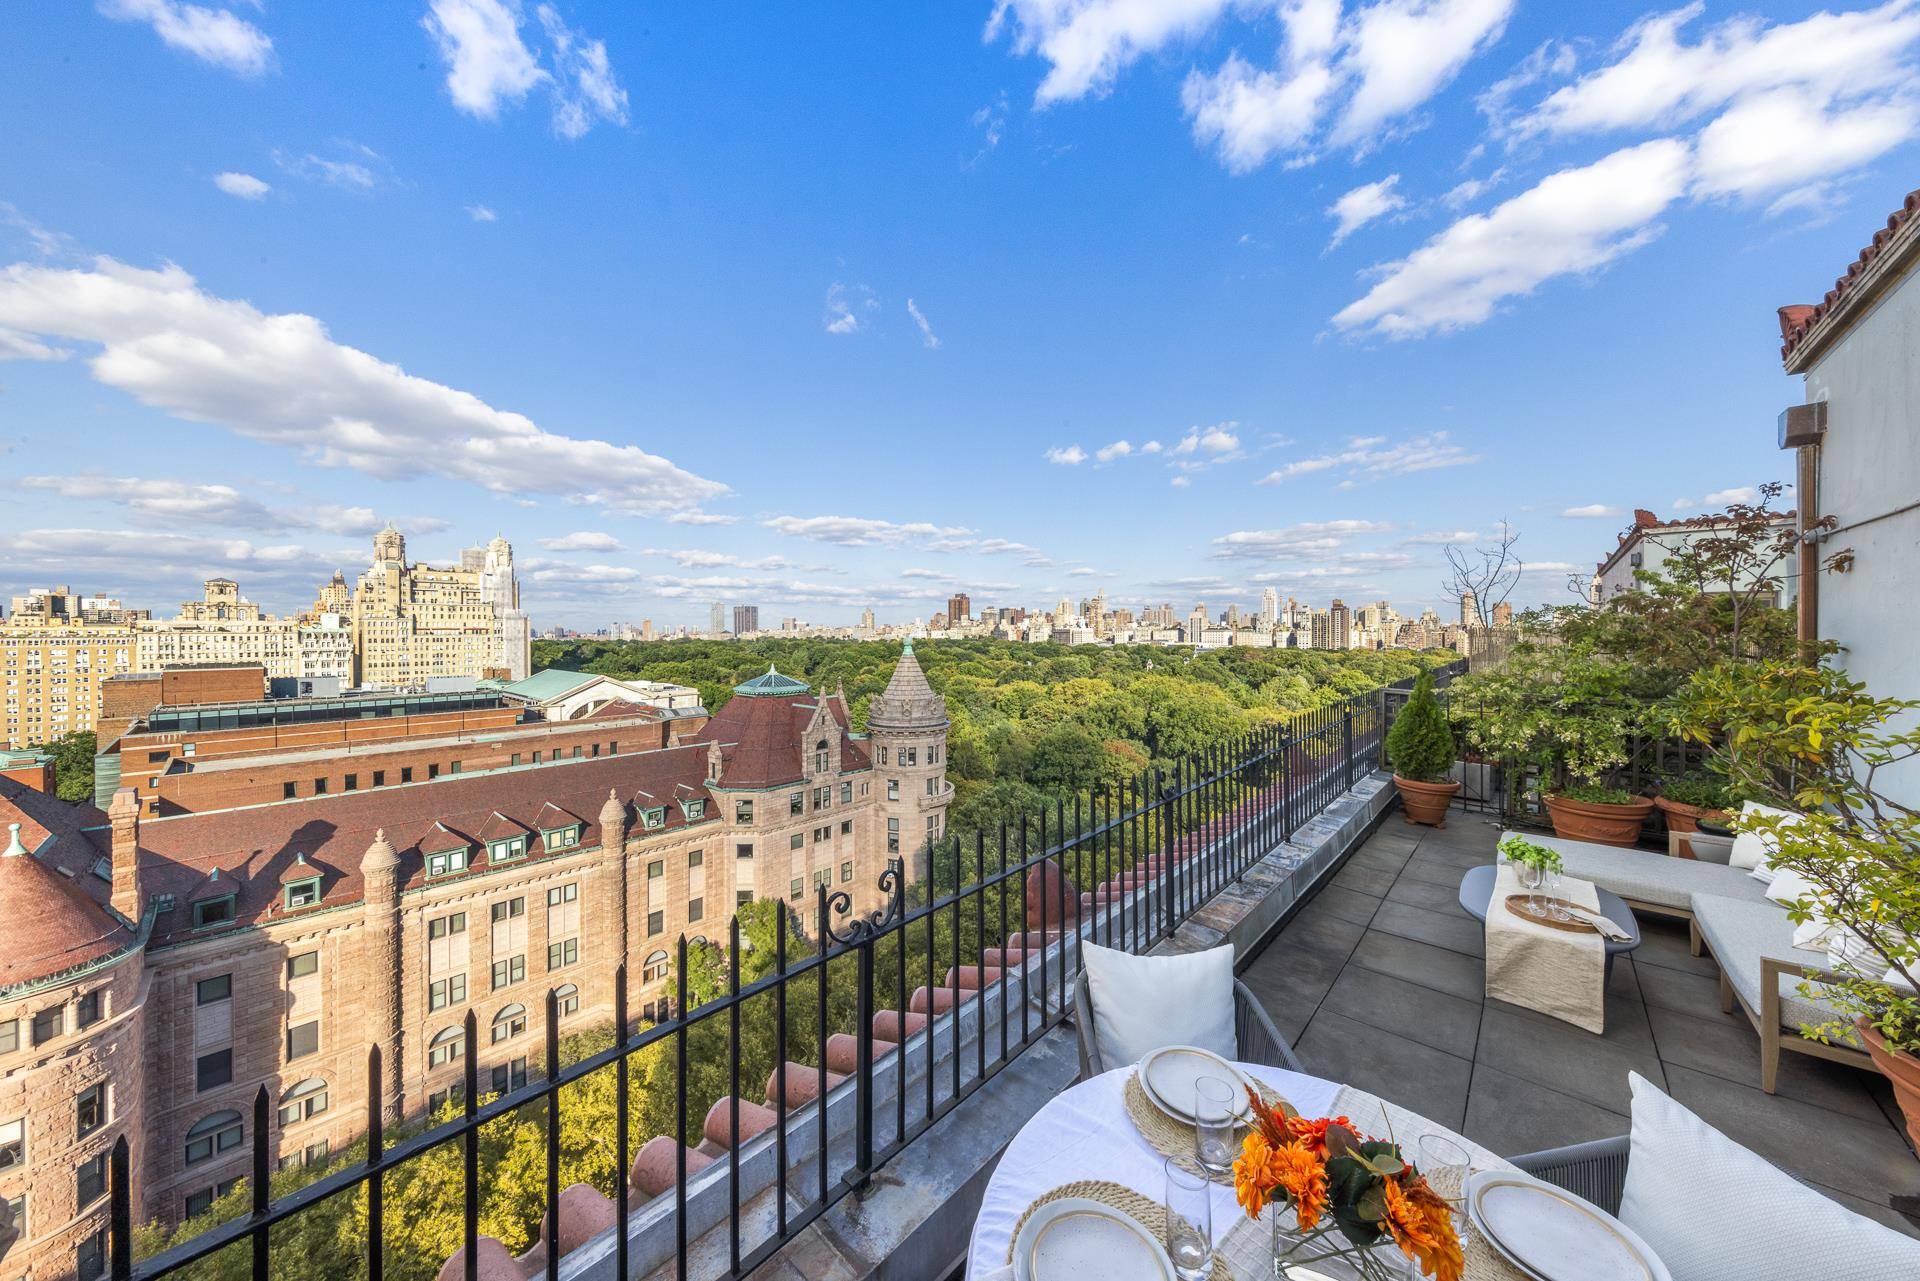 FALL IN LOVE ! with the most spectacular protected views from your TERRACE overlooking Central Park, the Museum of Natural History, miles of skyline, and a most joyful and peaceful ...